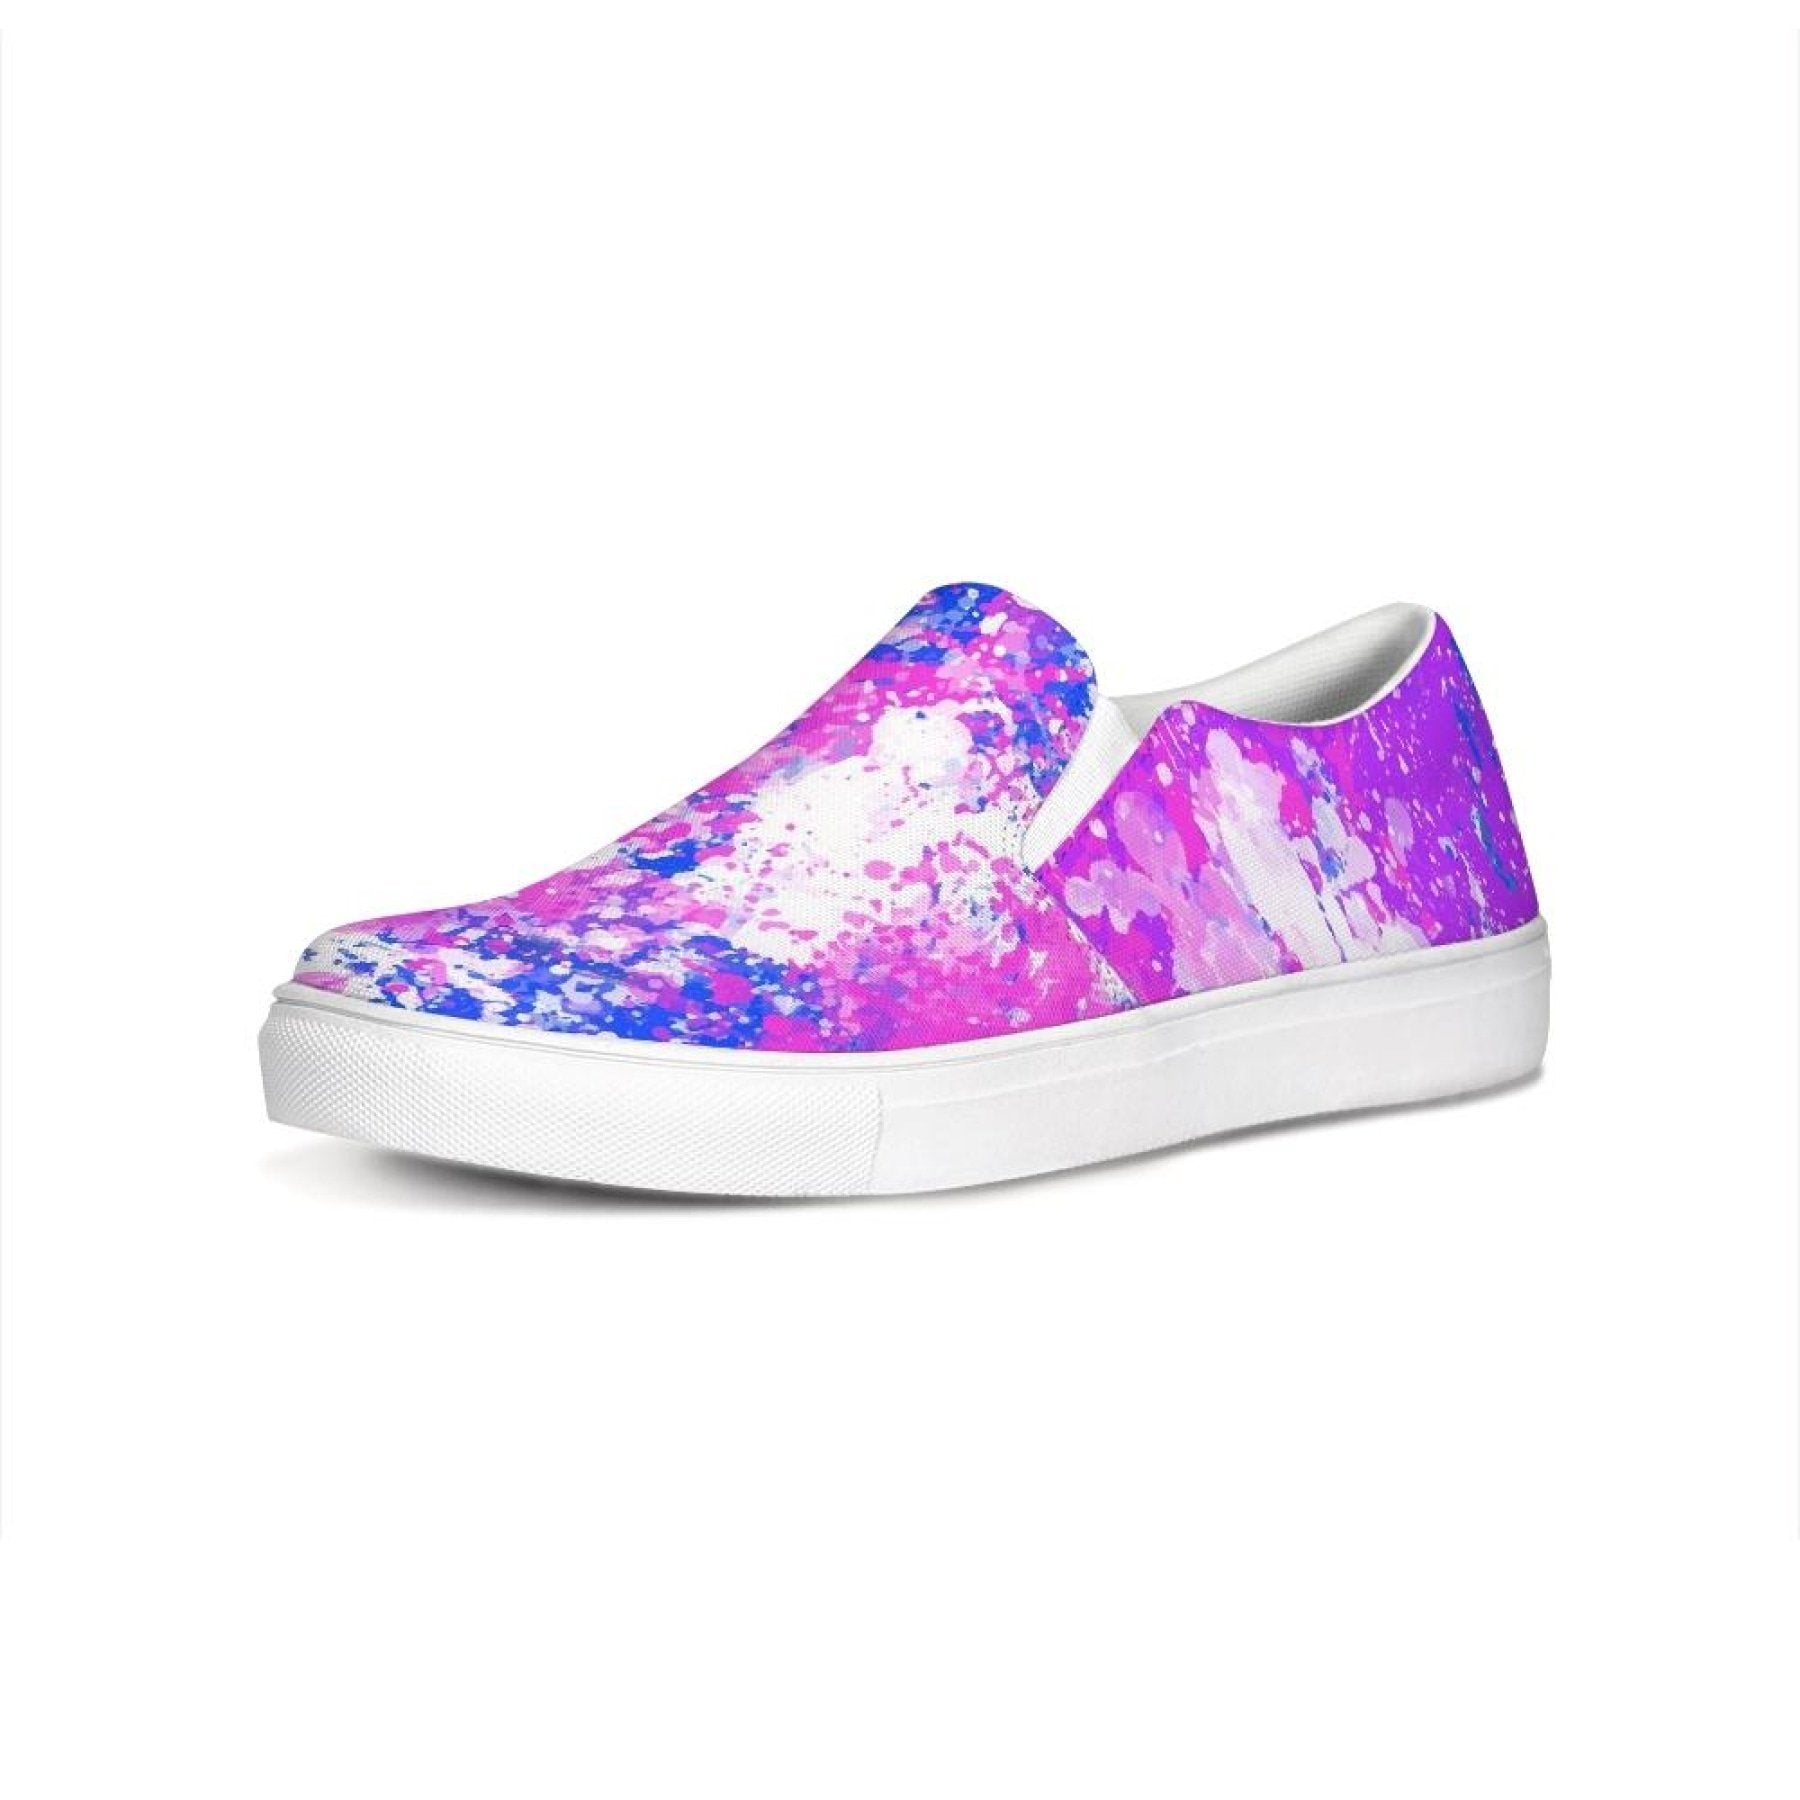 Uniquely You Womens Sneakers - Purple Tie-Dye Style Canvas Sports